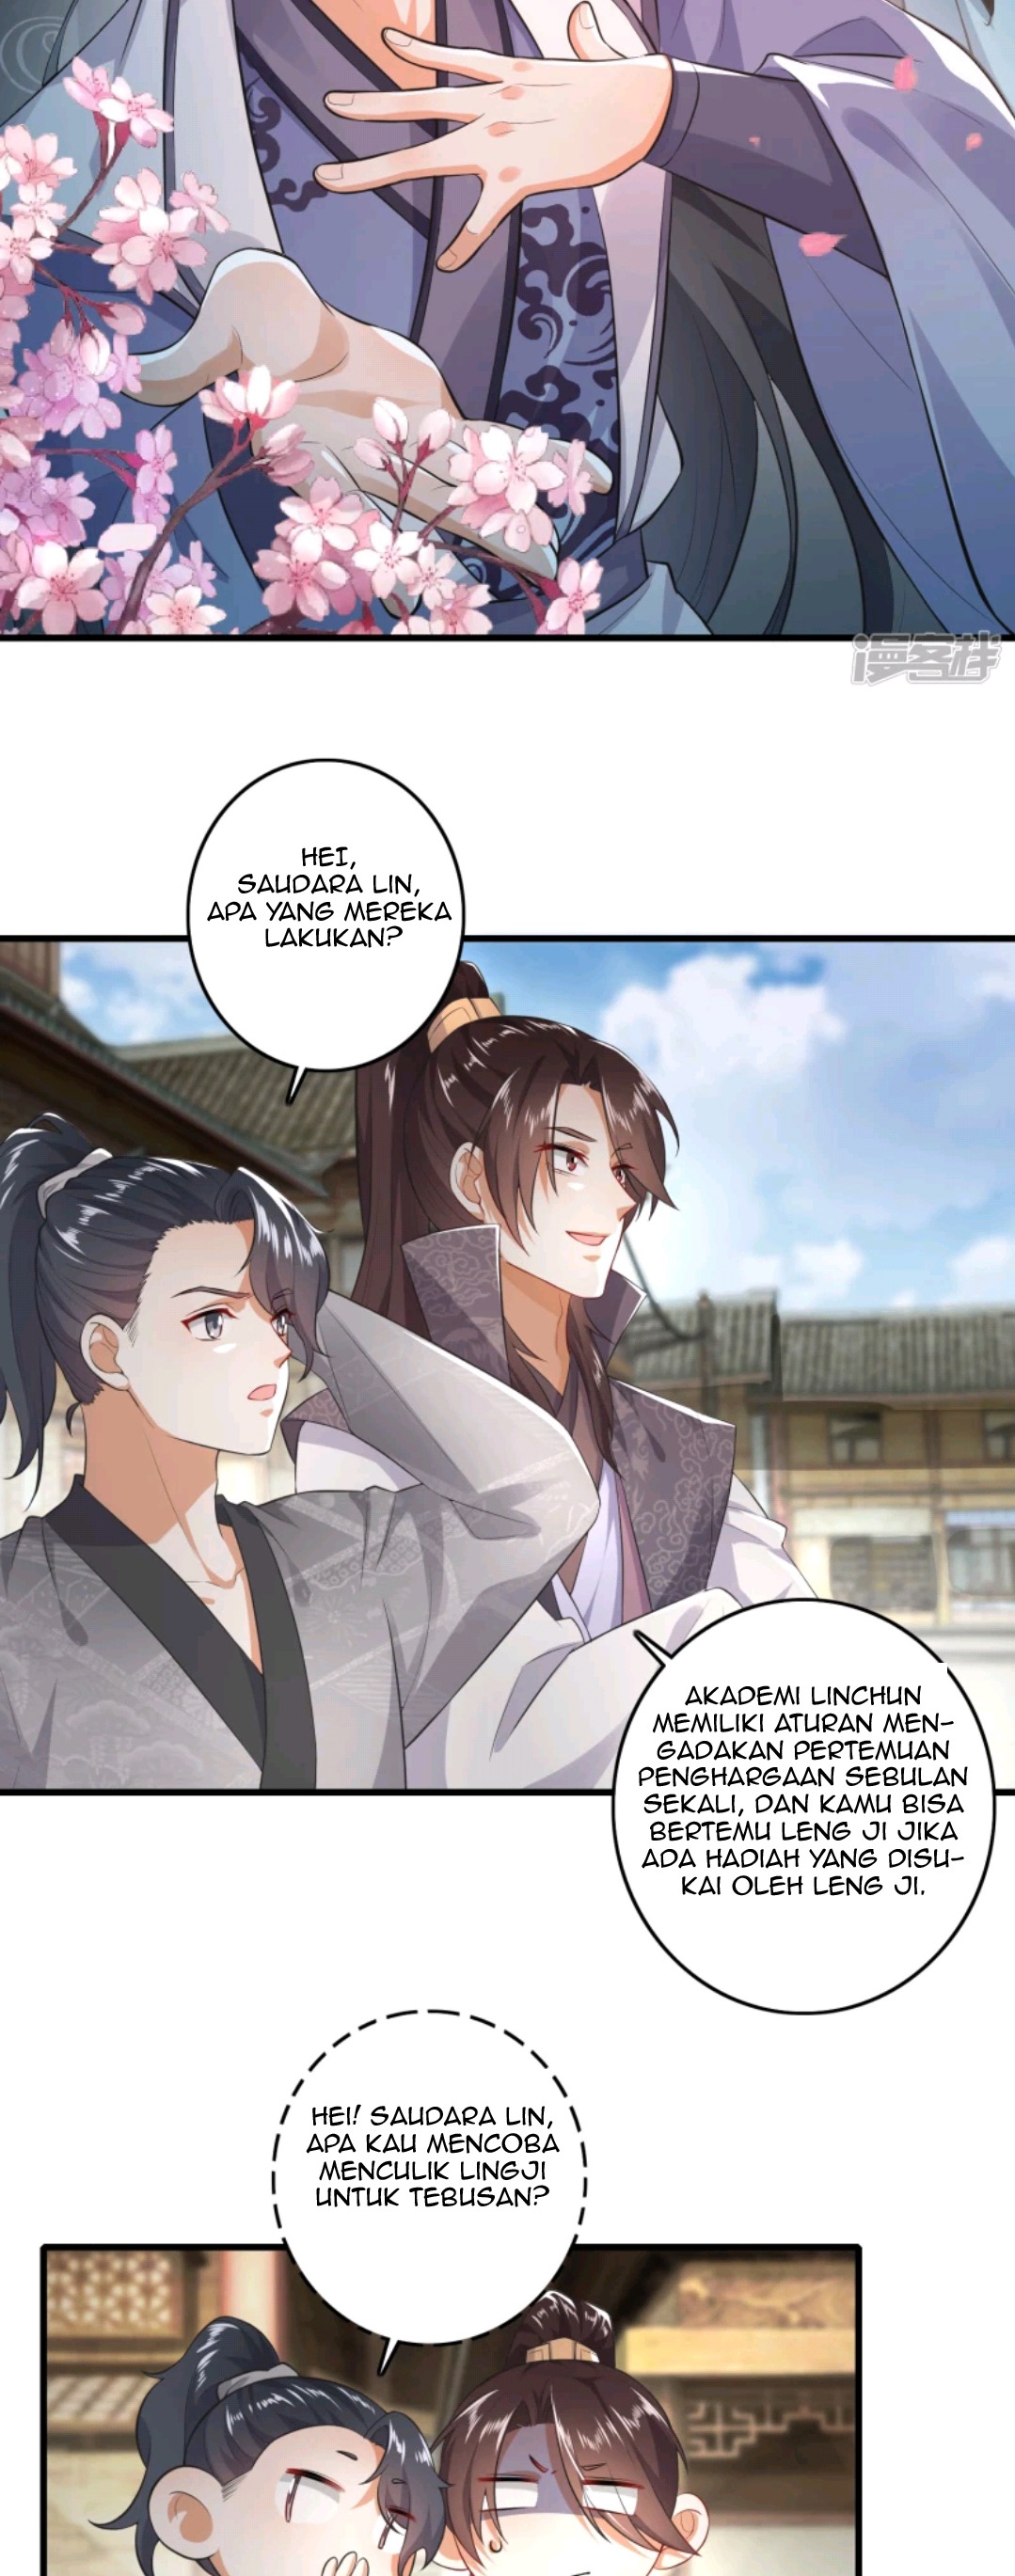 Best Son-In-Law Chapter 3